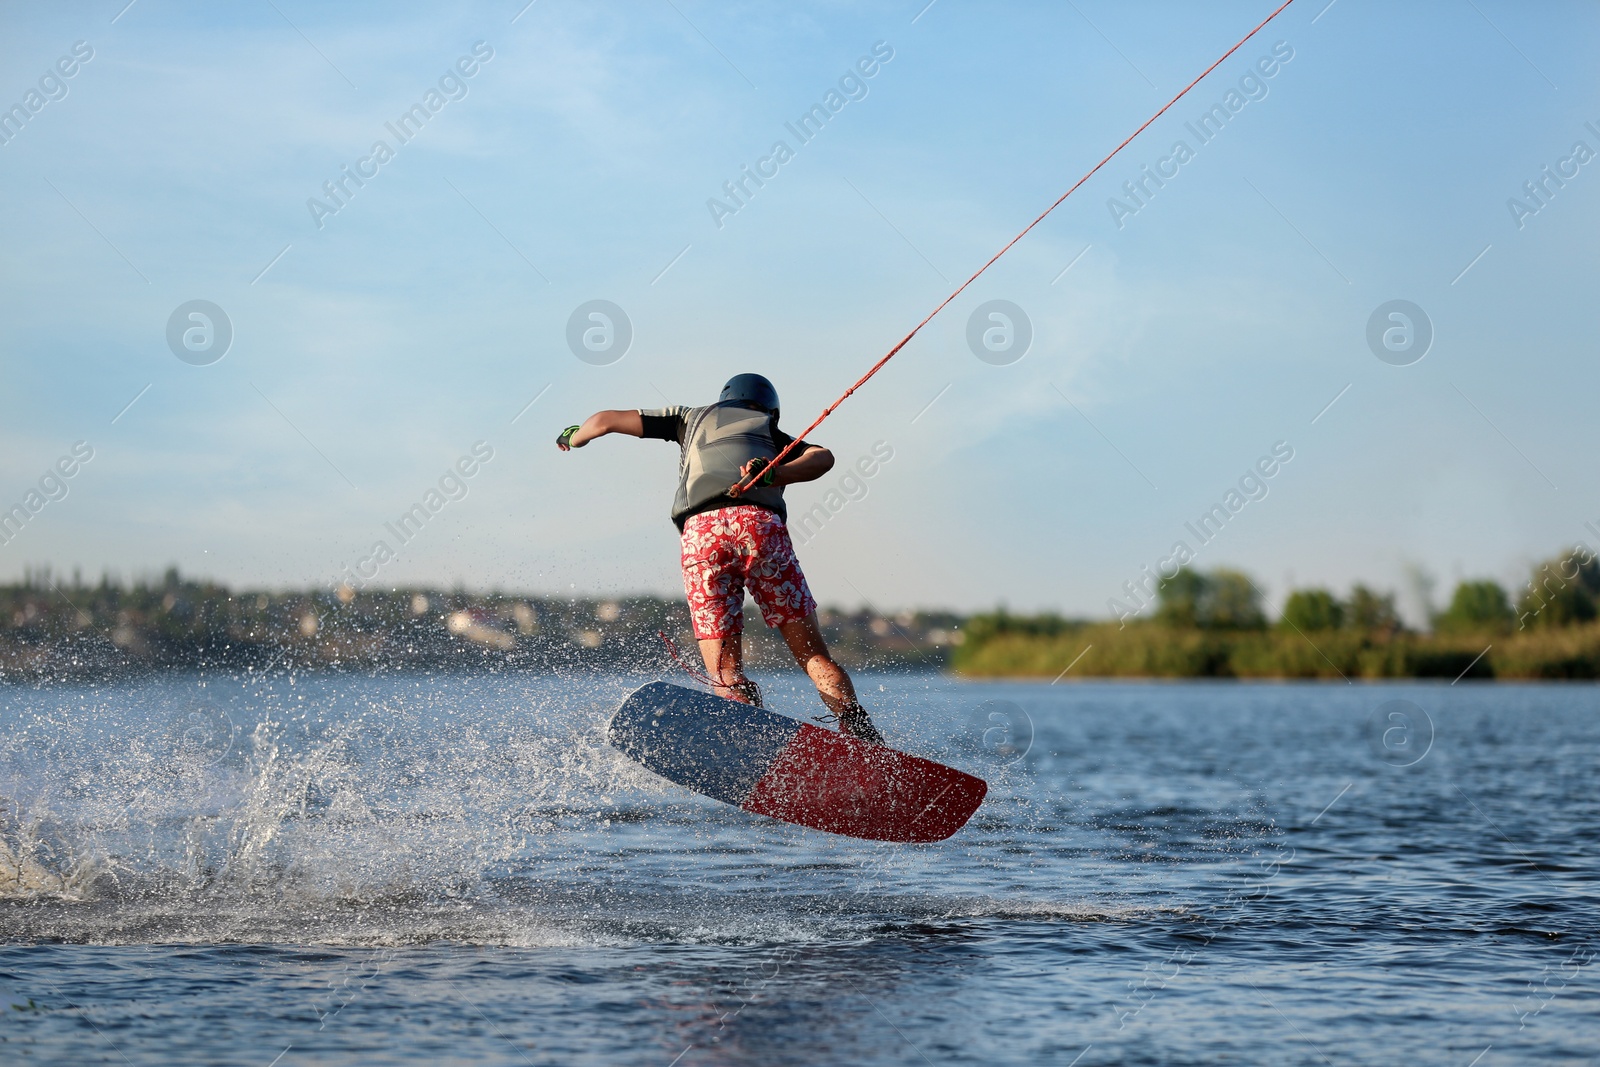 Photo of Teenage wakeboard doing trick on river, back view. Extreme water sport